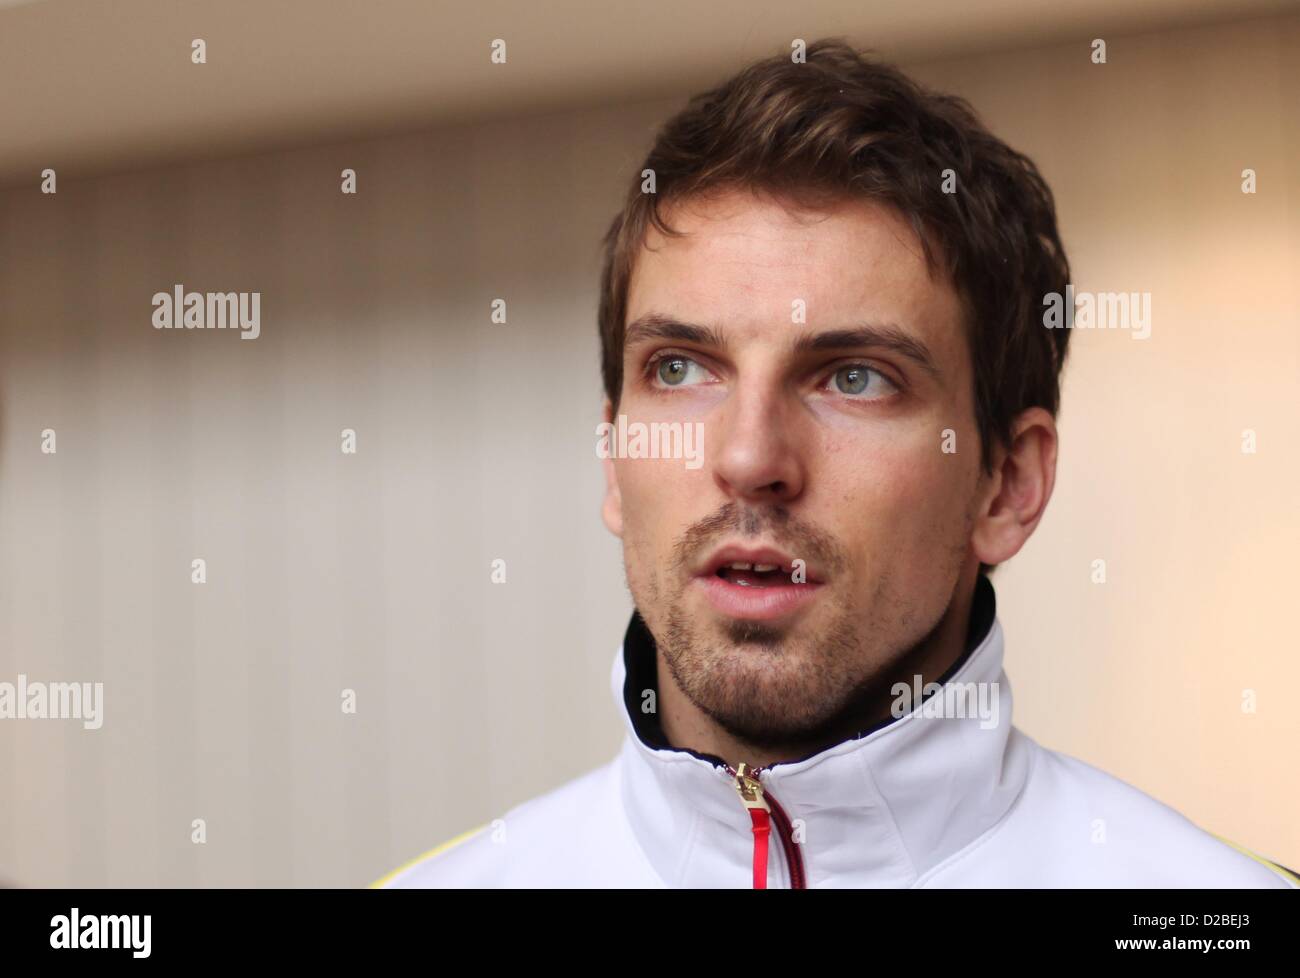 German player Adrian Pfahl attends a press conference of Team Germany during the men's Handball World Championships in Granollers, Spain, 19 January 2013. Photo: FABIAN STRATENSCHULTE Stock Photo